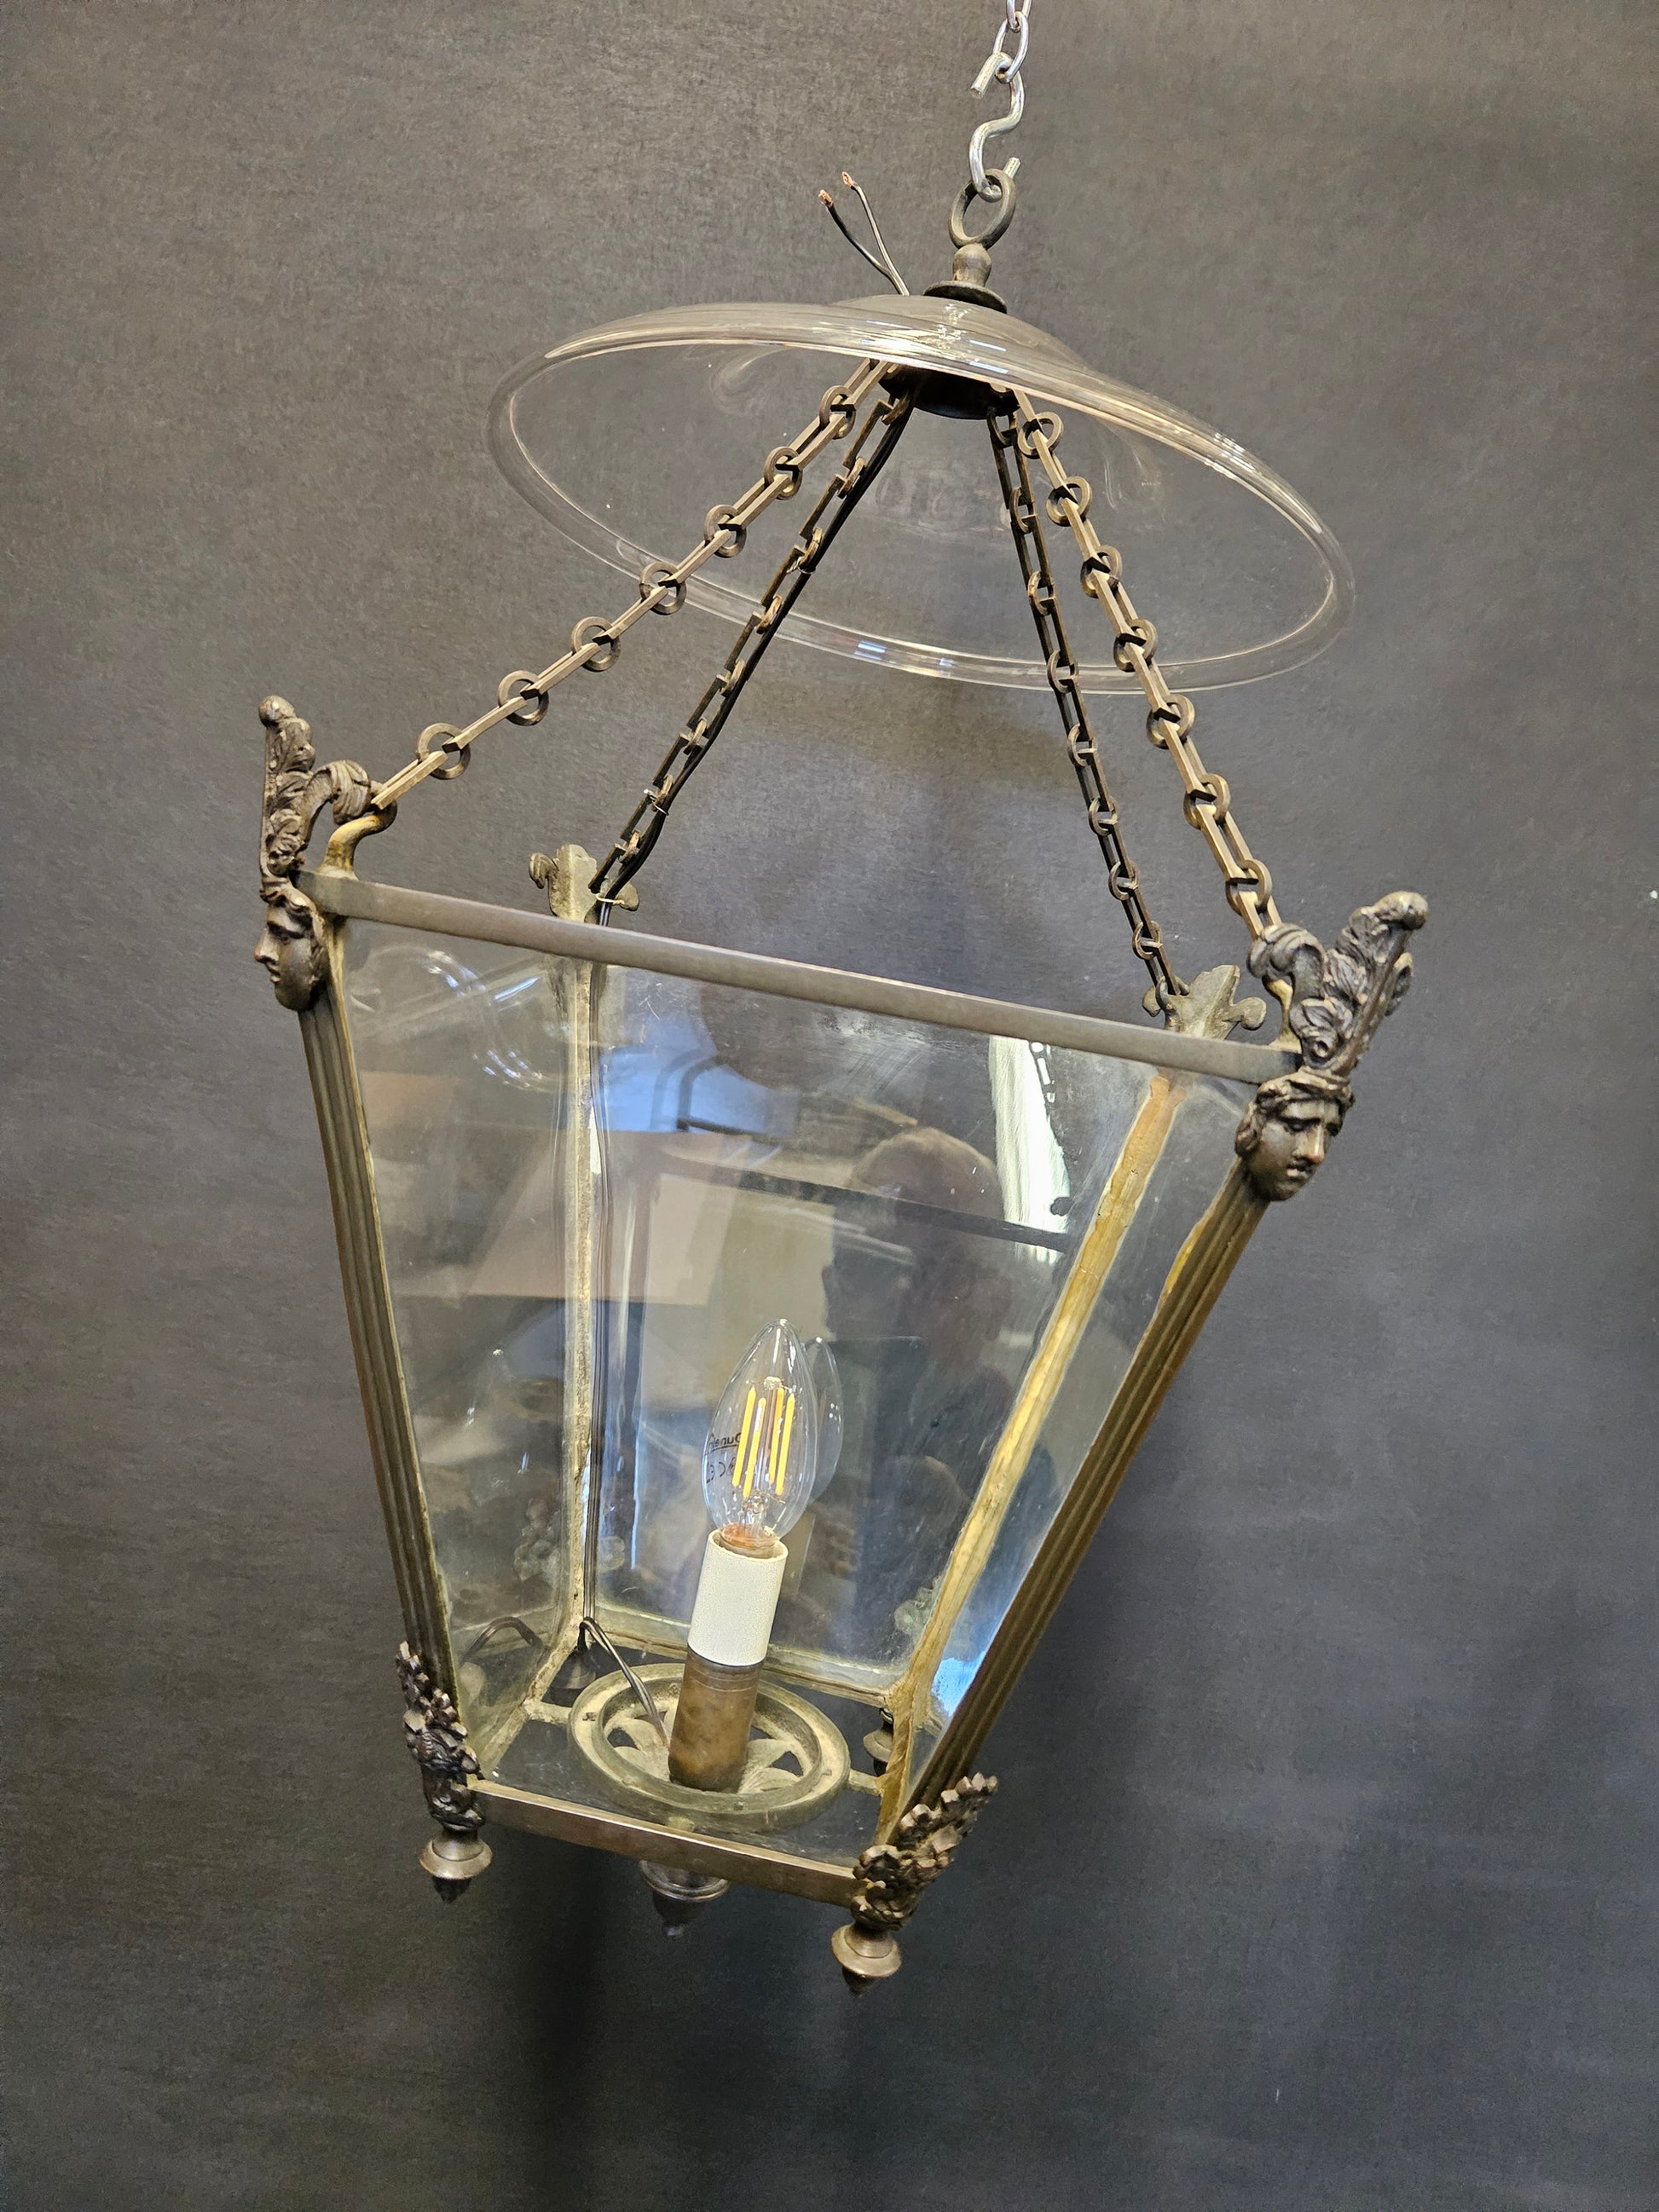 angled view of lantern from front